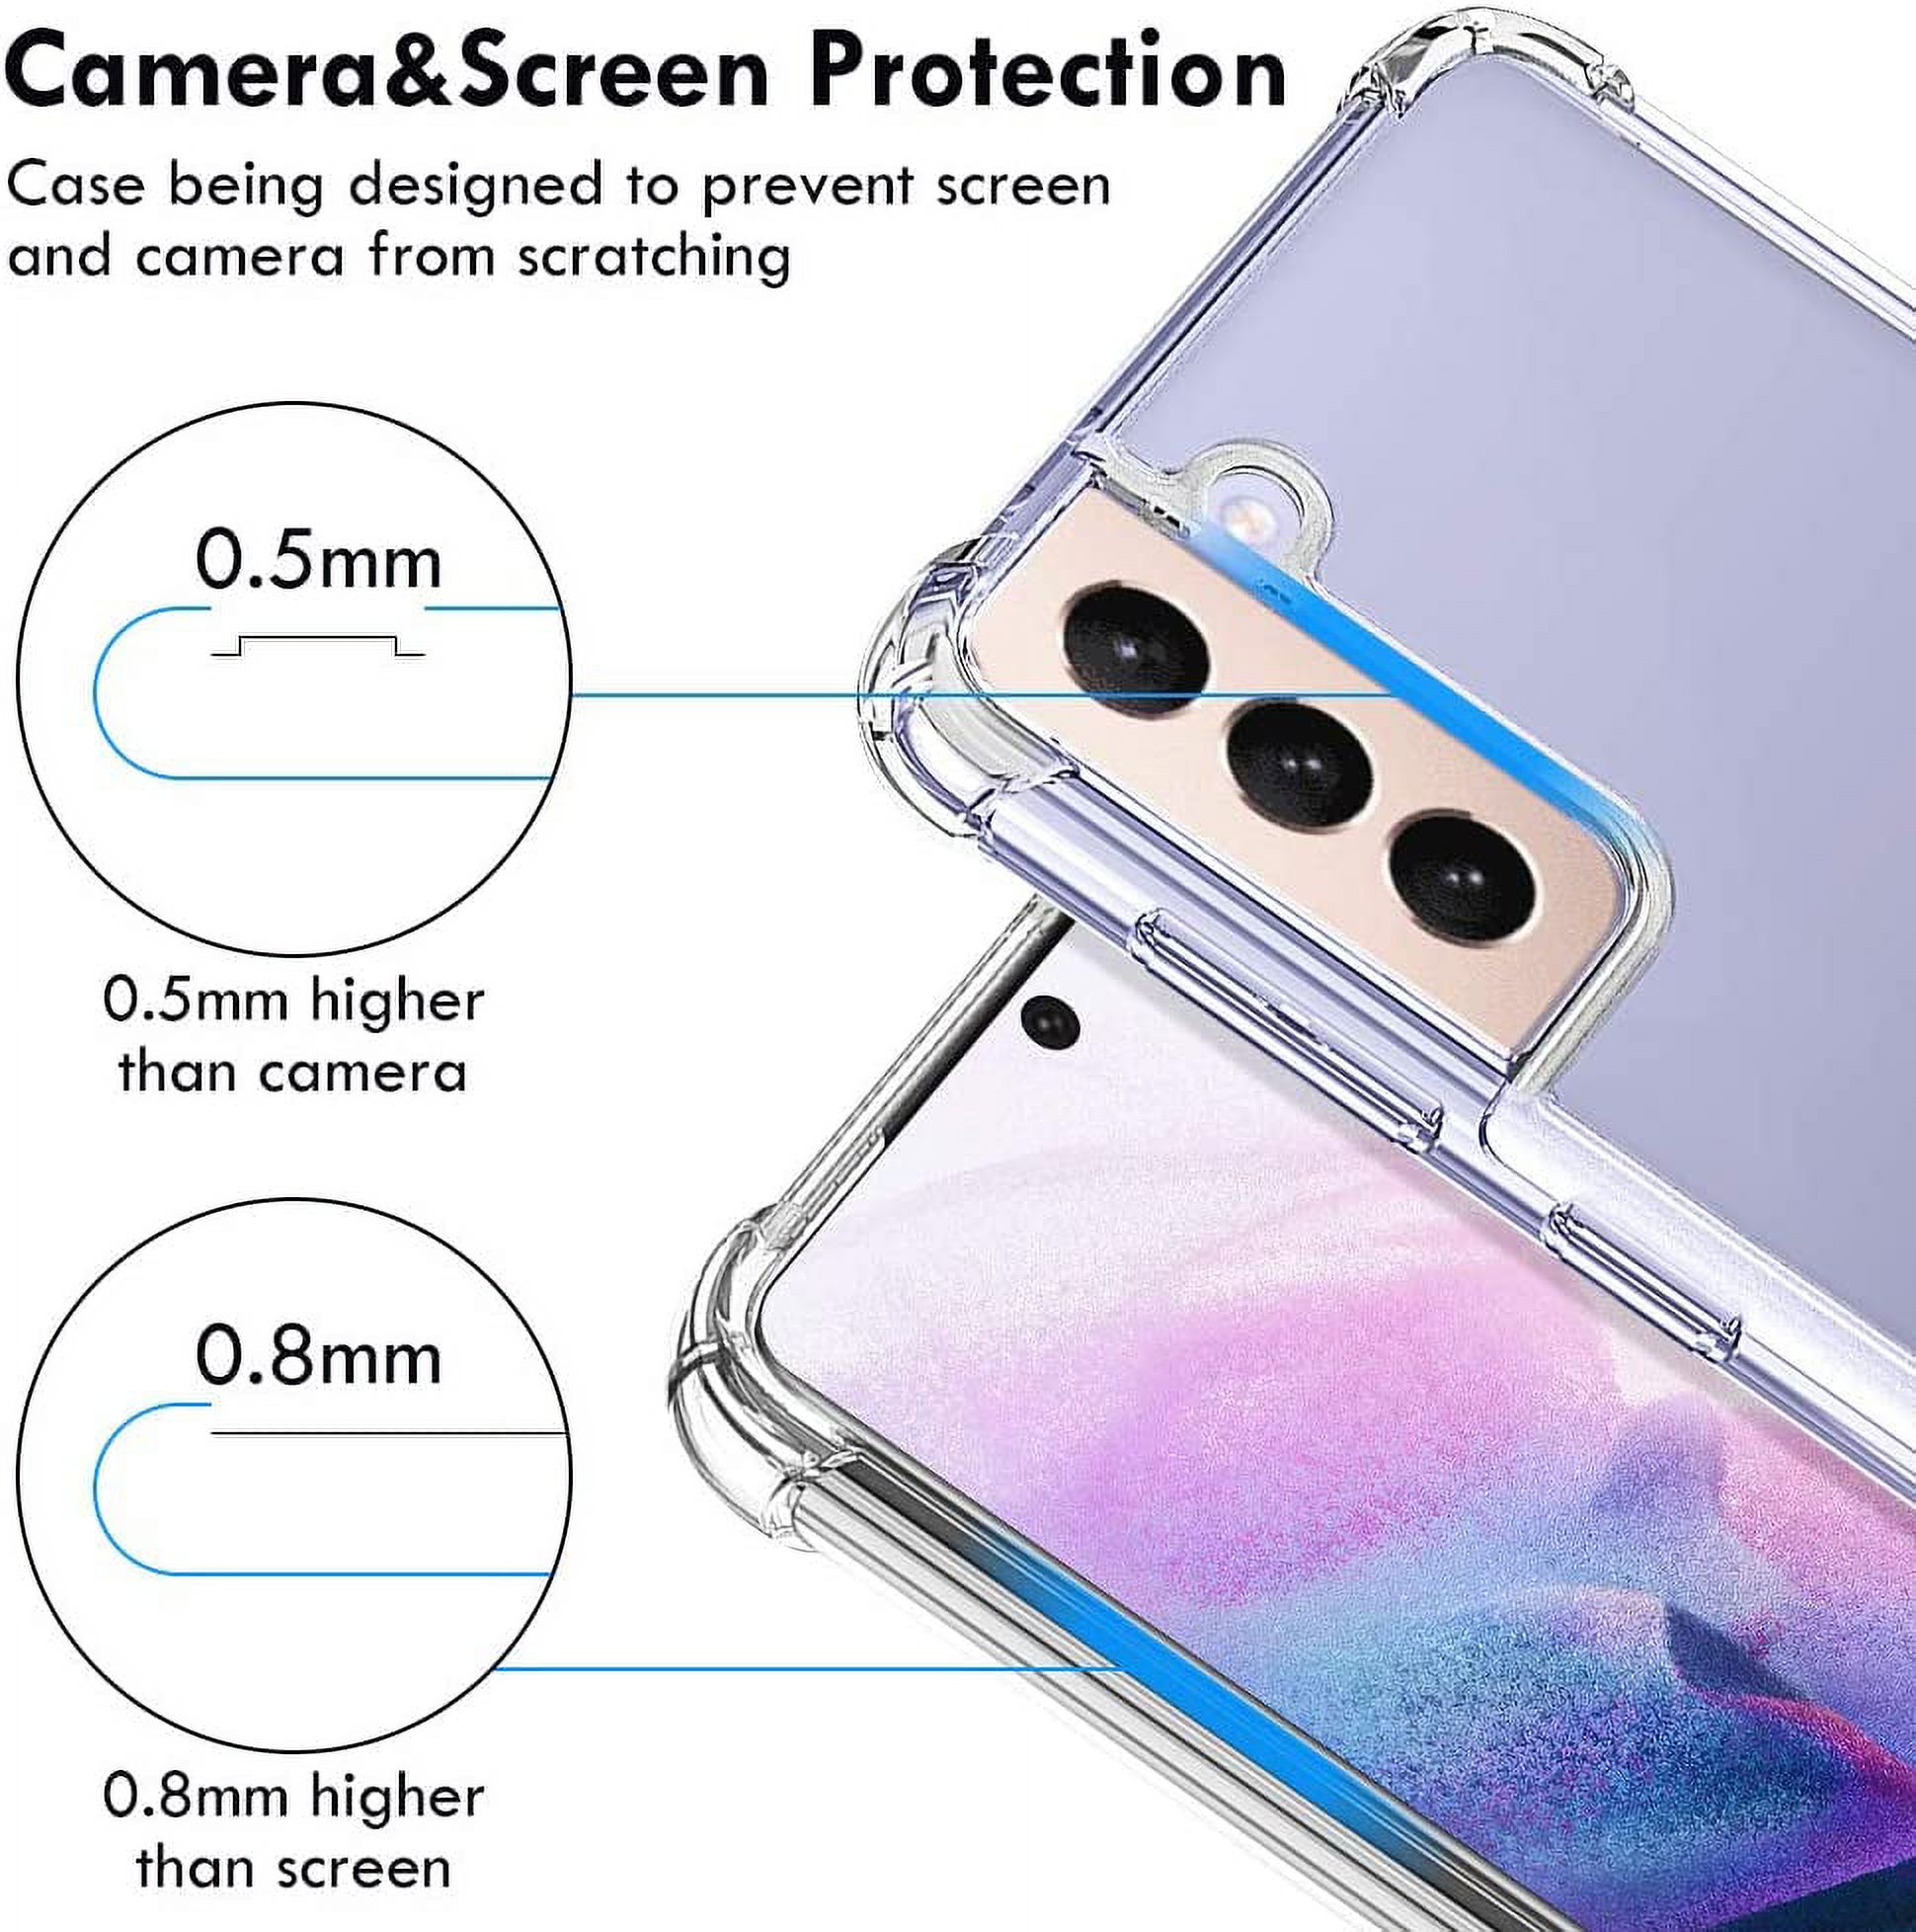 Njjex Galaxy S21 Ultra / Galaxy S21 / Galaxy S21 Plus 5G Case, Njjex Galaxy S21+ Crystal Clear Shock Absorption Technology Bumper Soft TPU Cover Case for Samsung Galaxy S21 Plus 5G 2021 -Clear - image 5 of 7